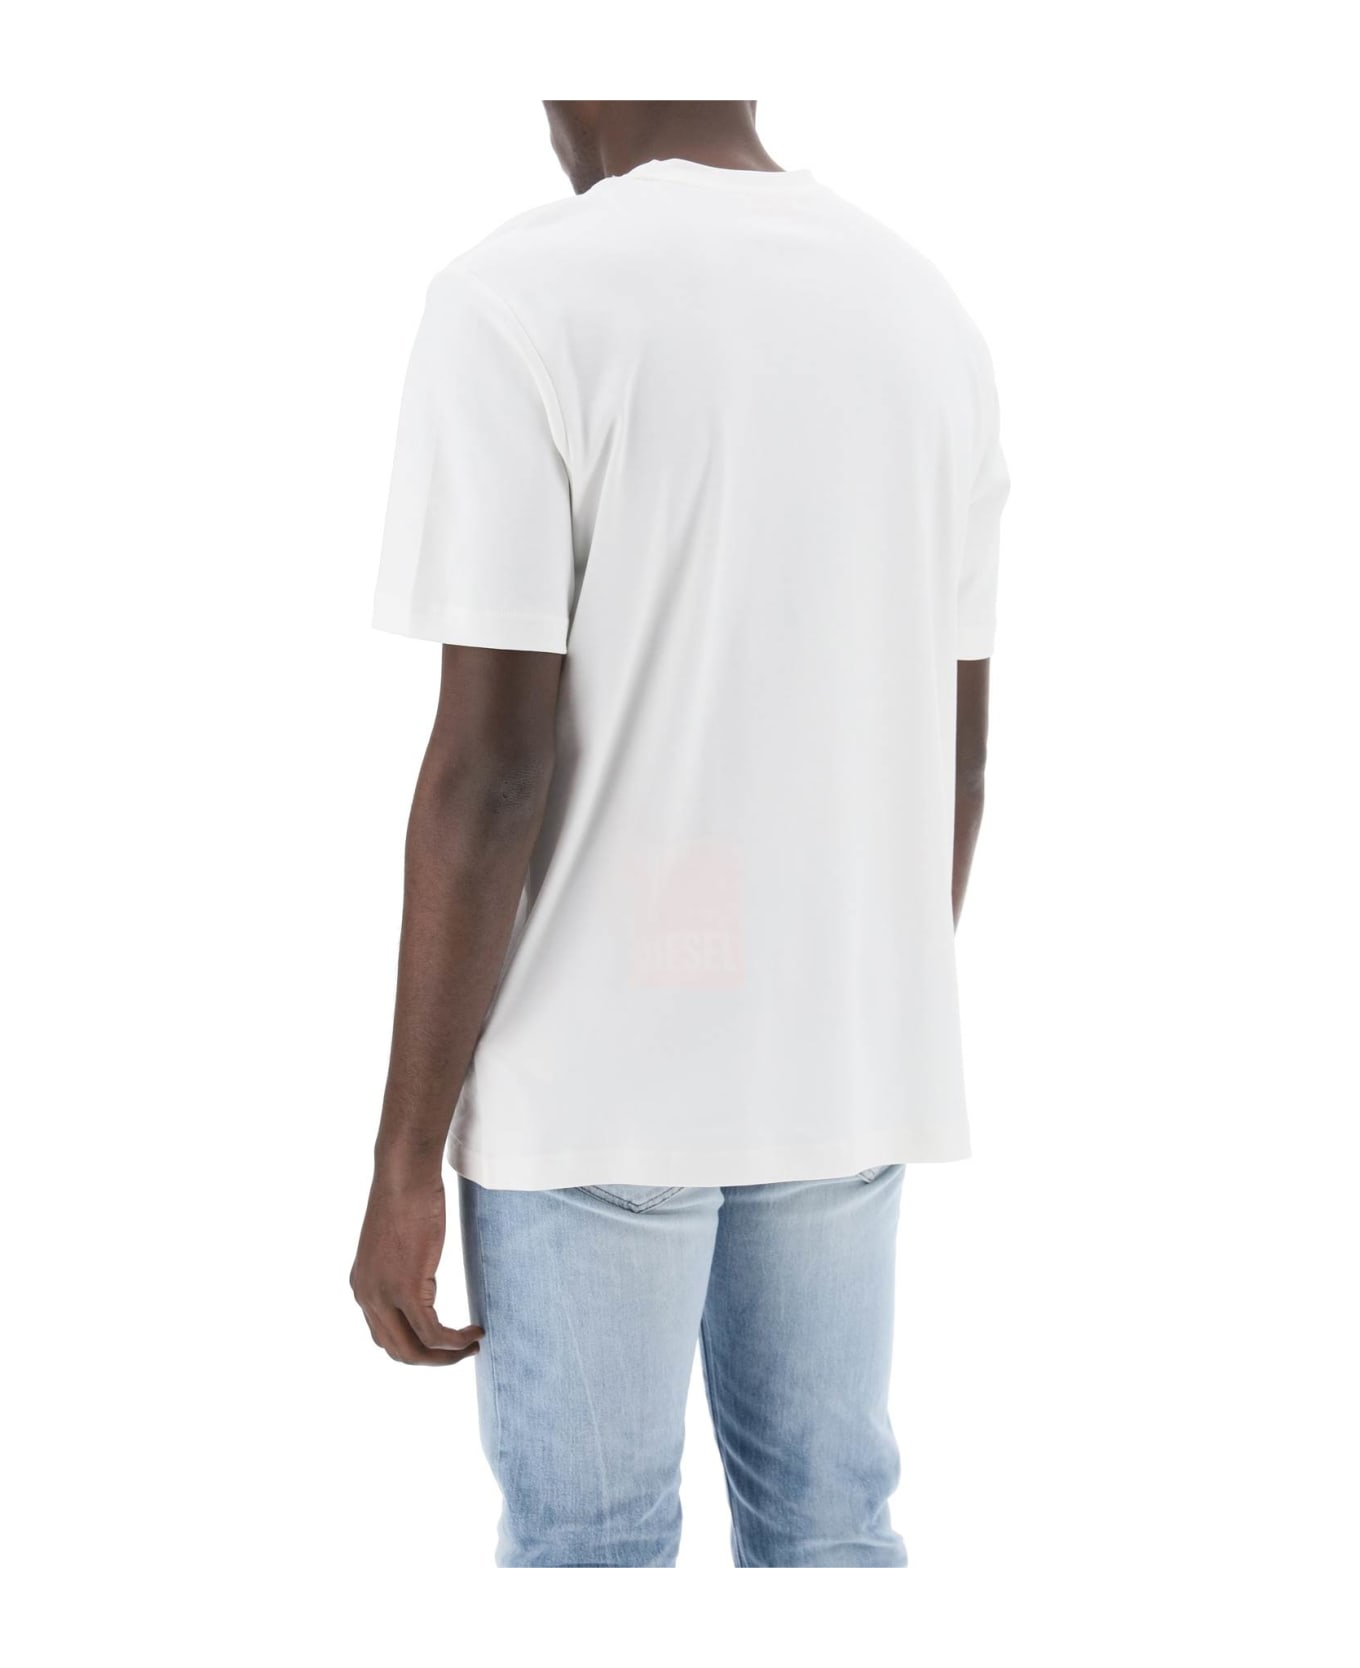 Diesel 't-just-doval-pj' T-shirt - Off/white シャツ